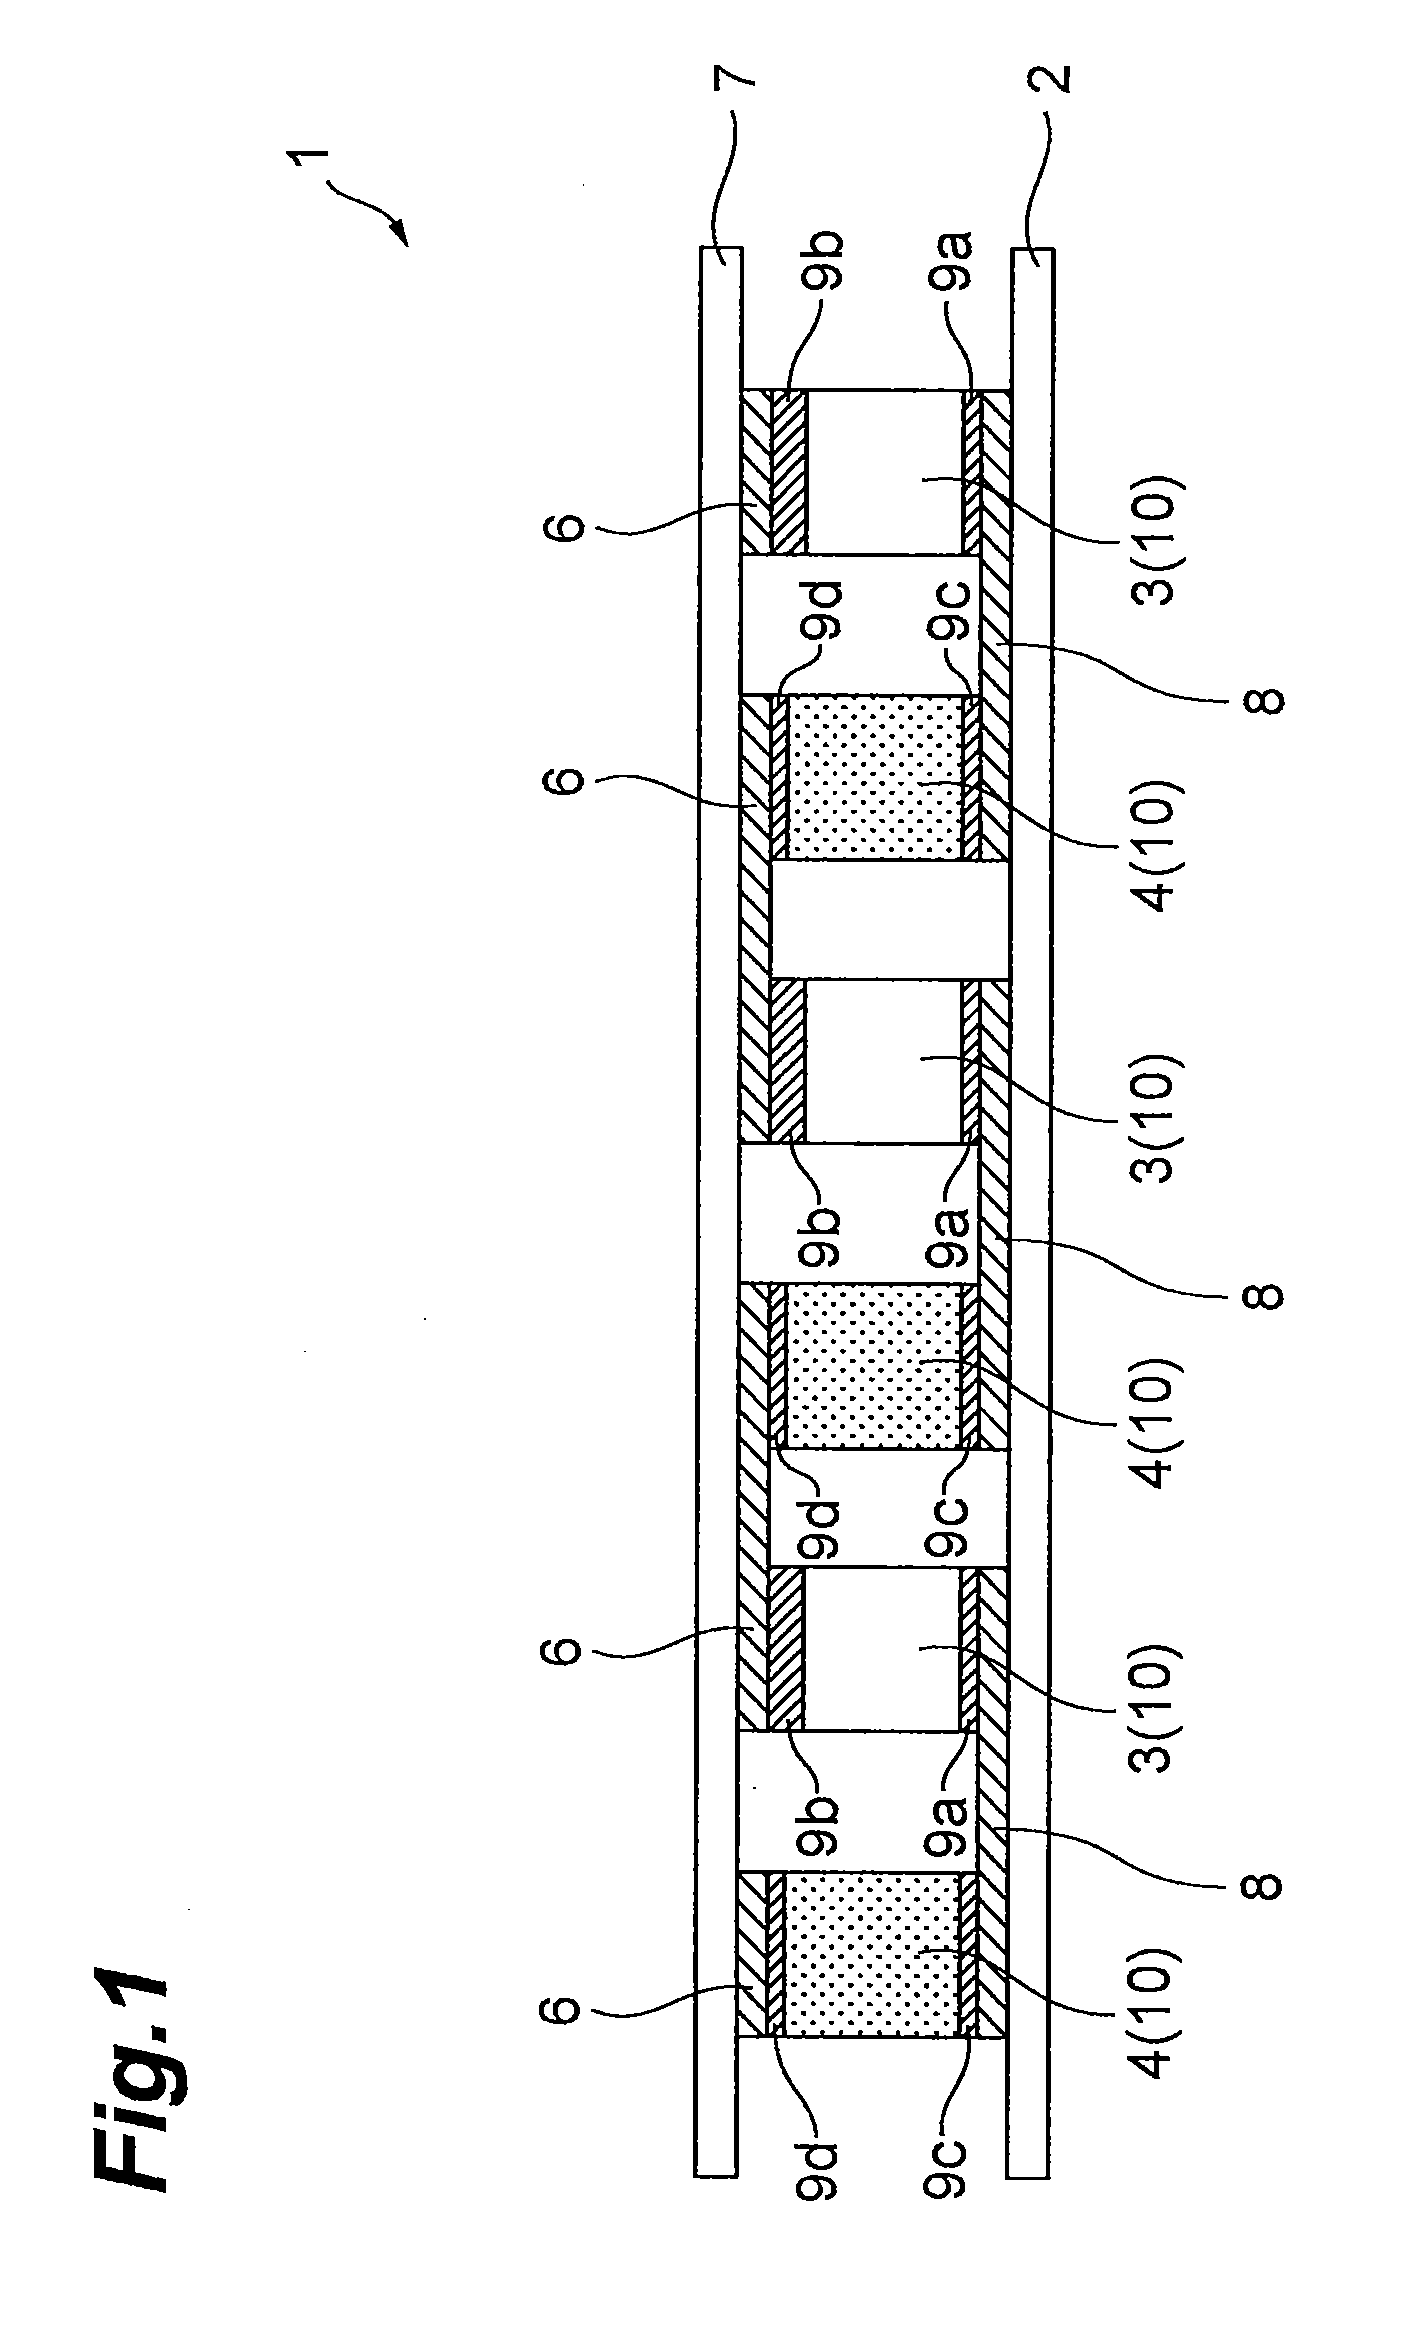 Thermoelectric conversion module